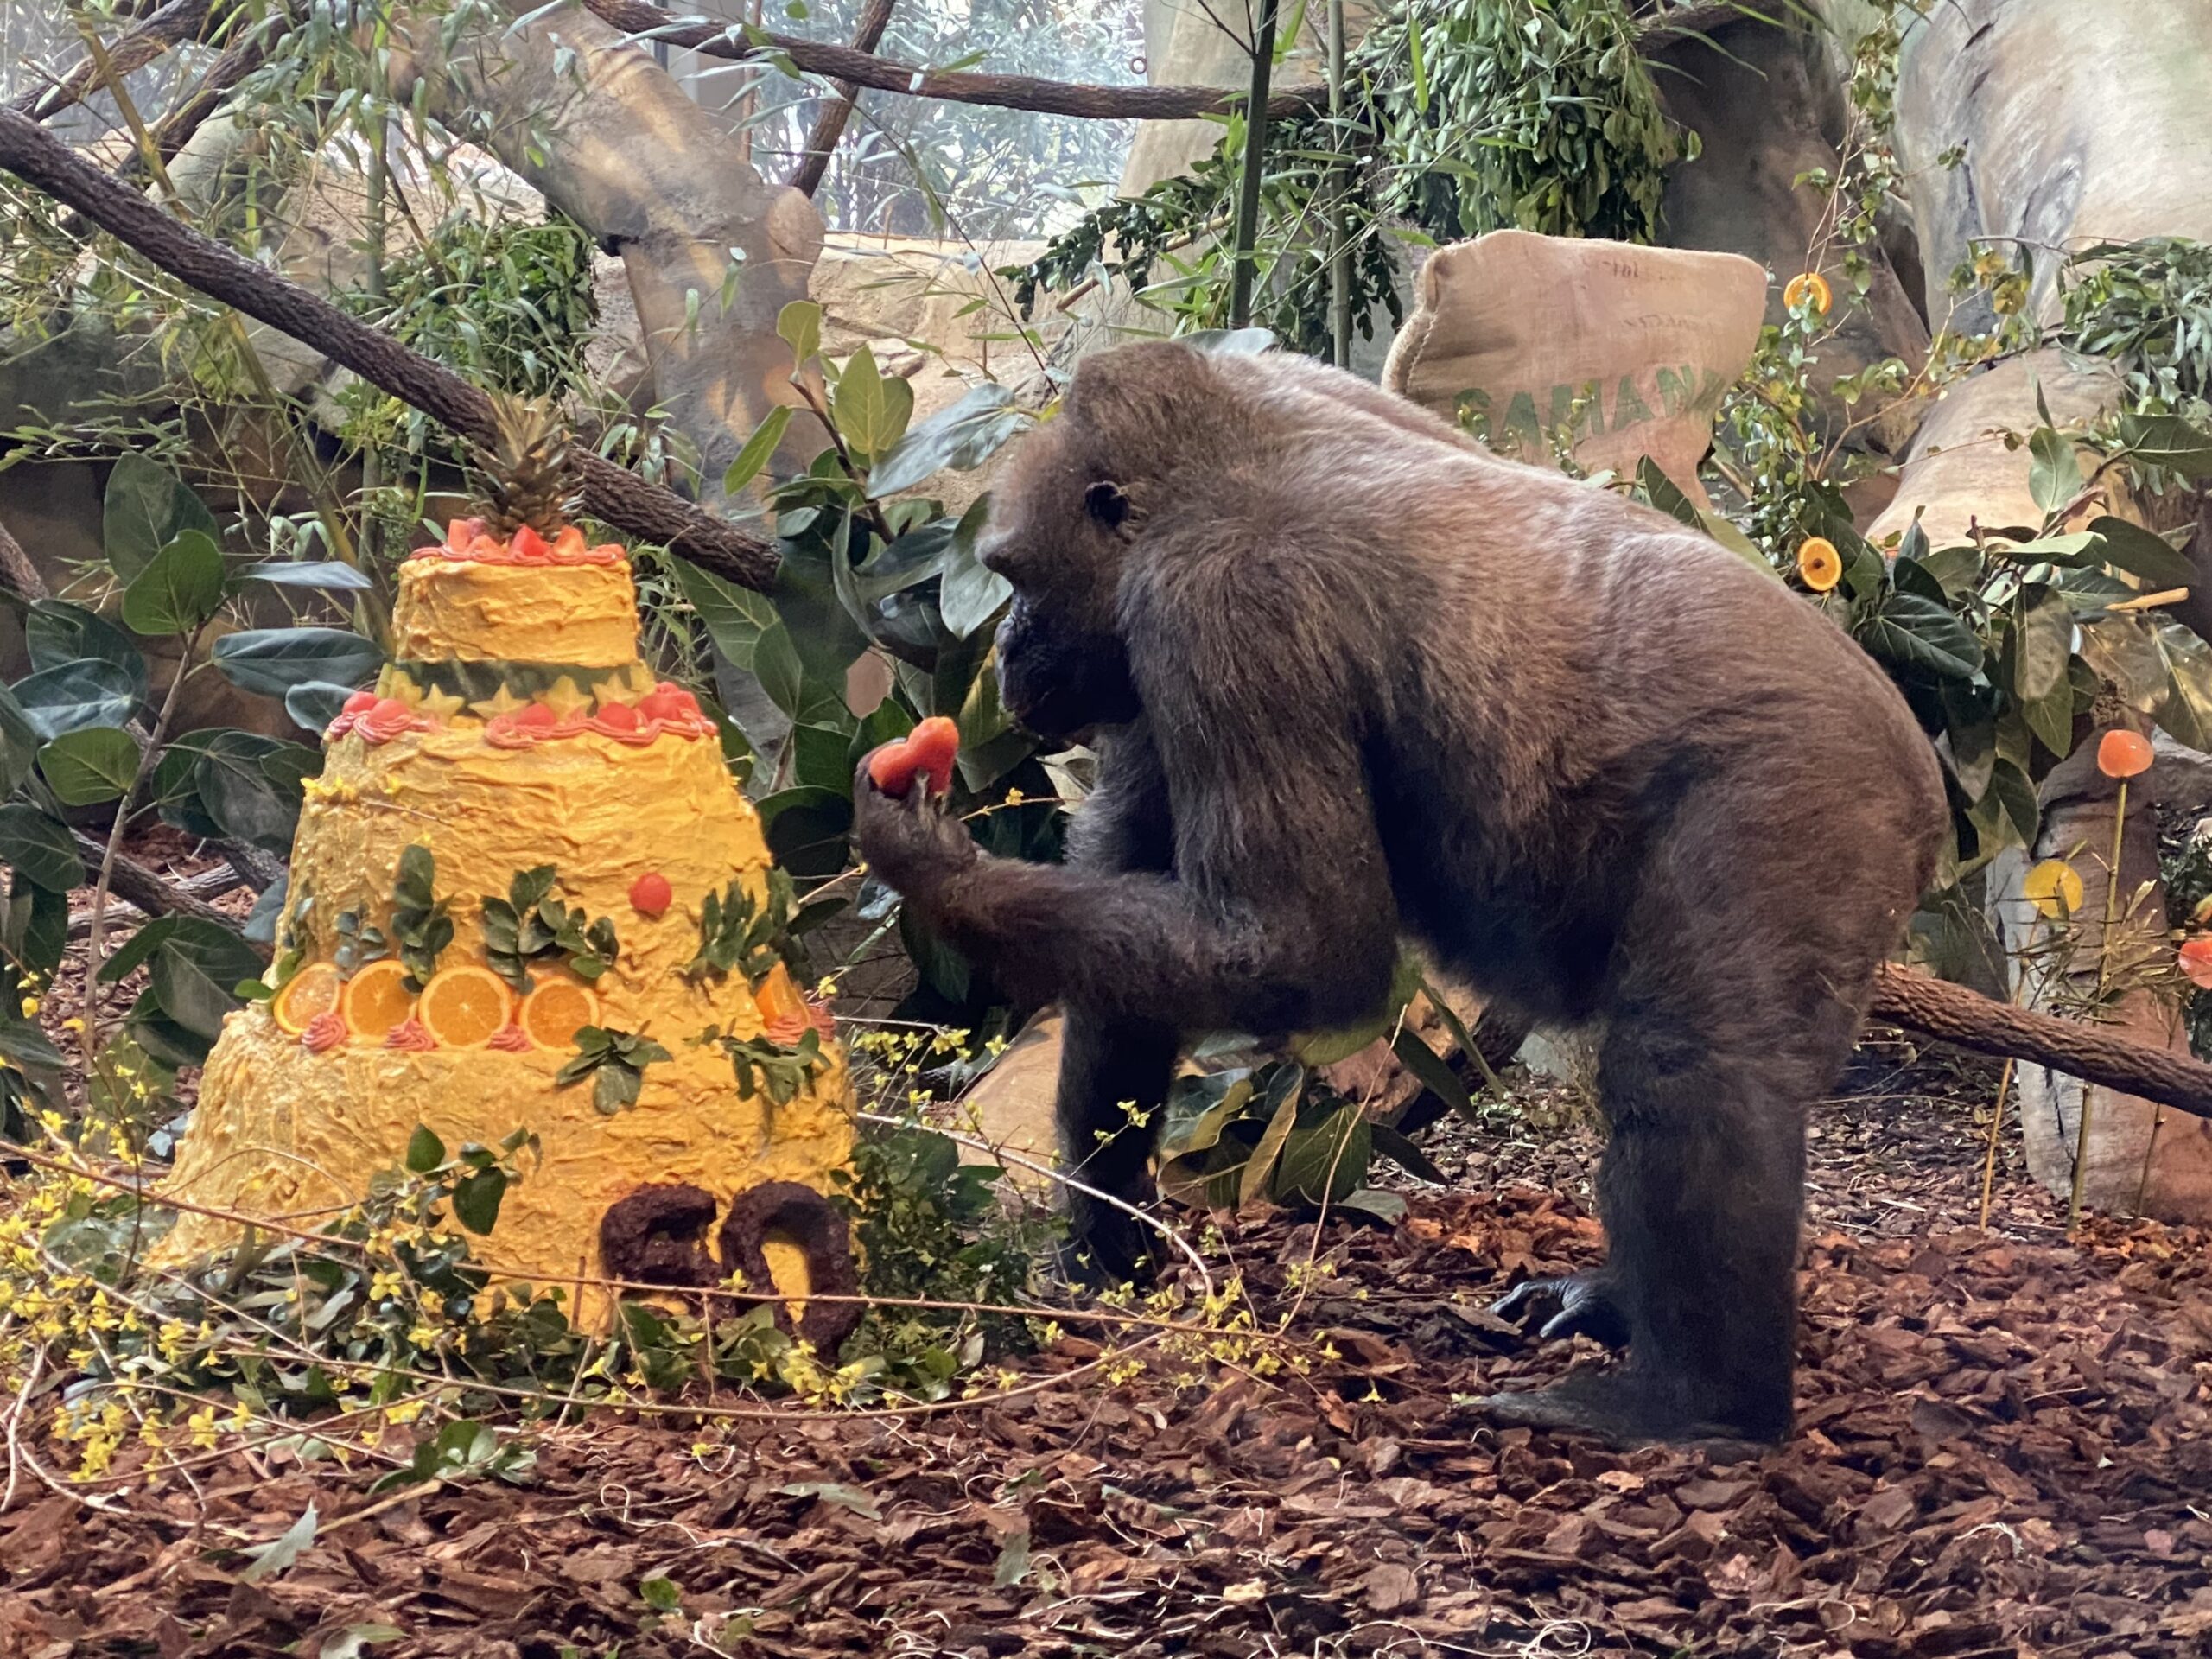 samantha the gorilla looks at her 50th birthday cake while holding a watermelon shaped like a heart